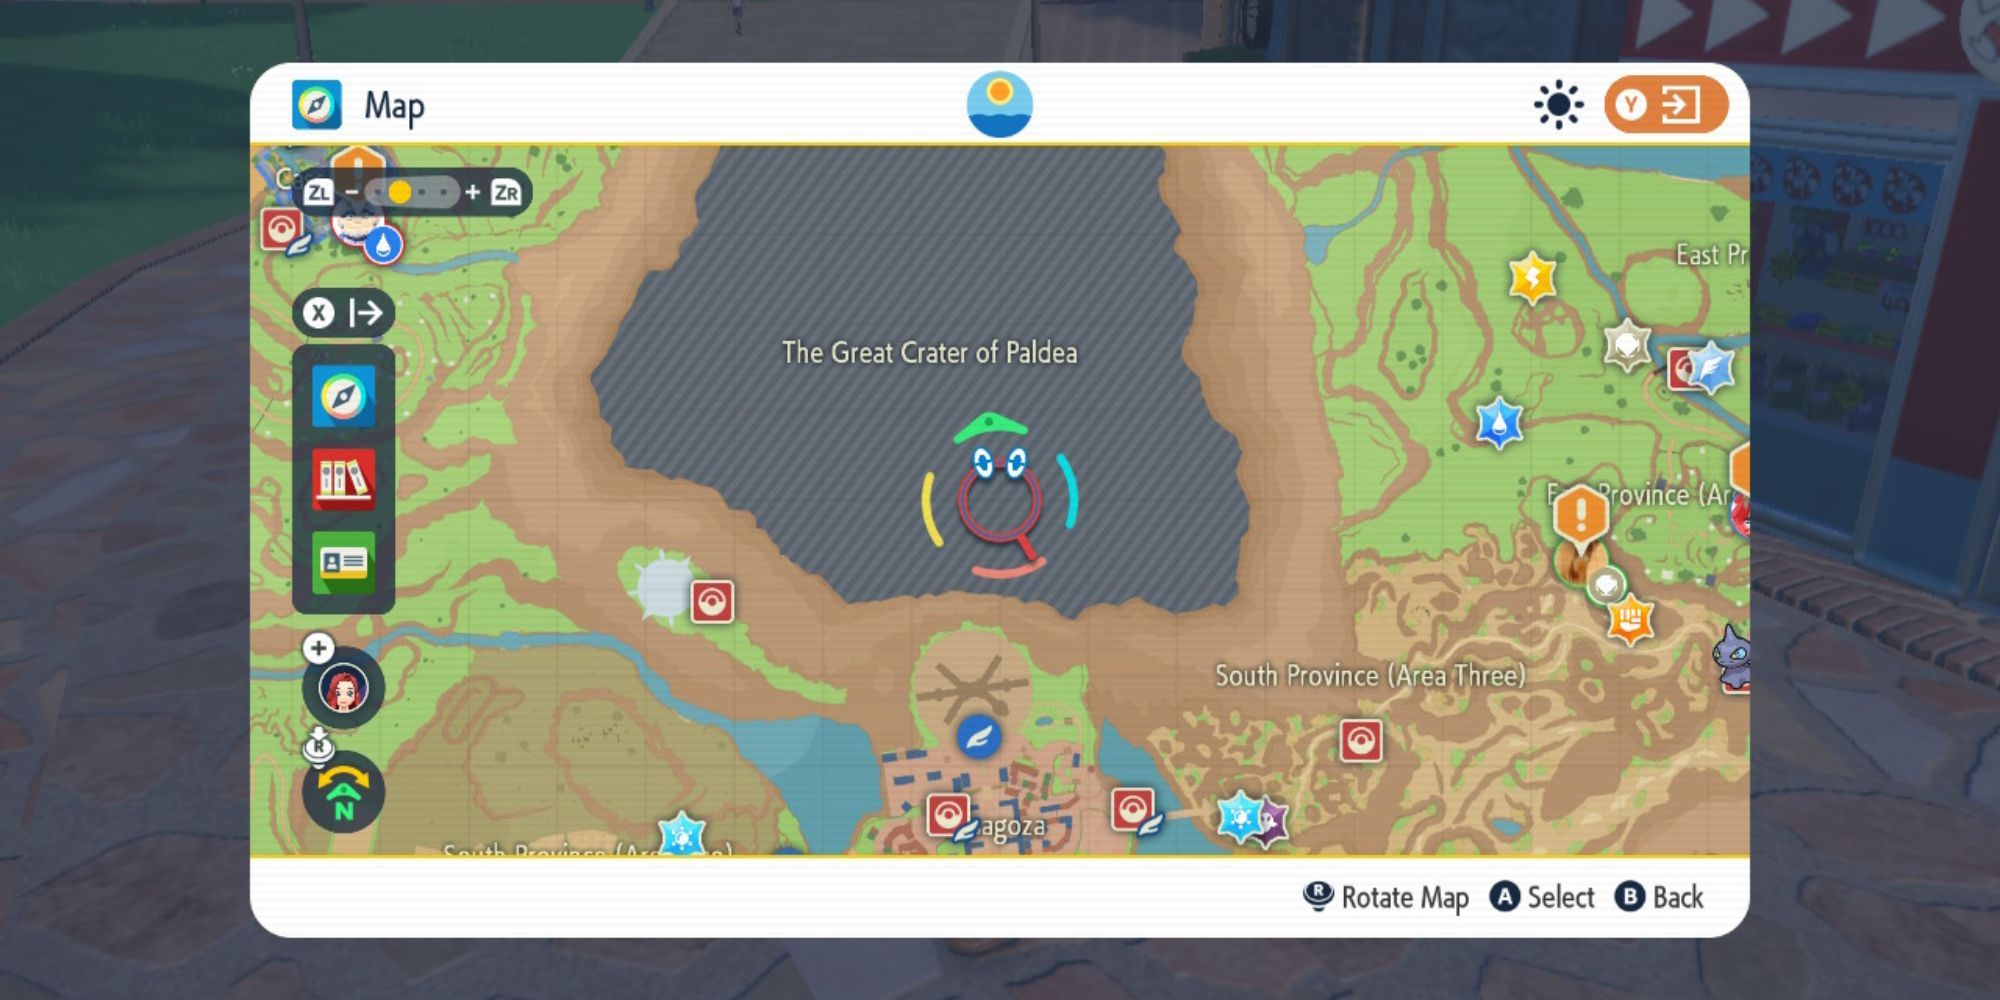 The map screen showing the Great Crater of Paldea Pokemon Scarlet & Violet